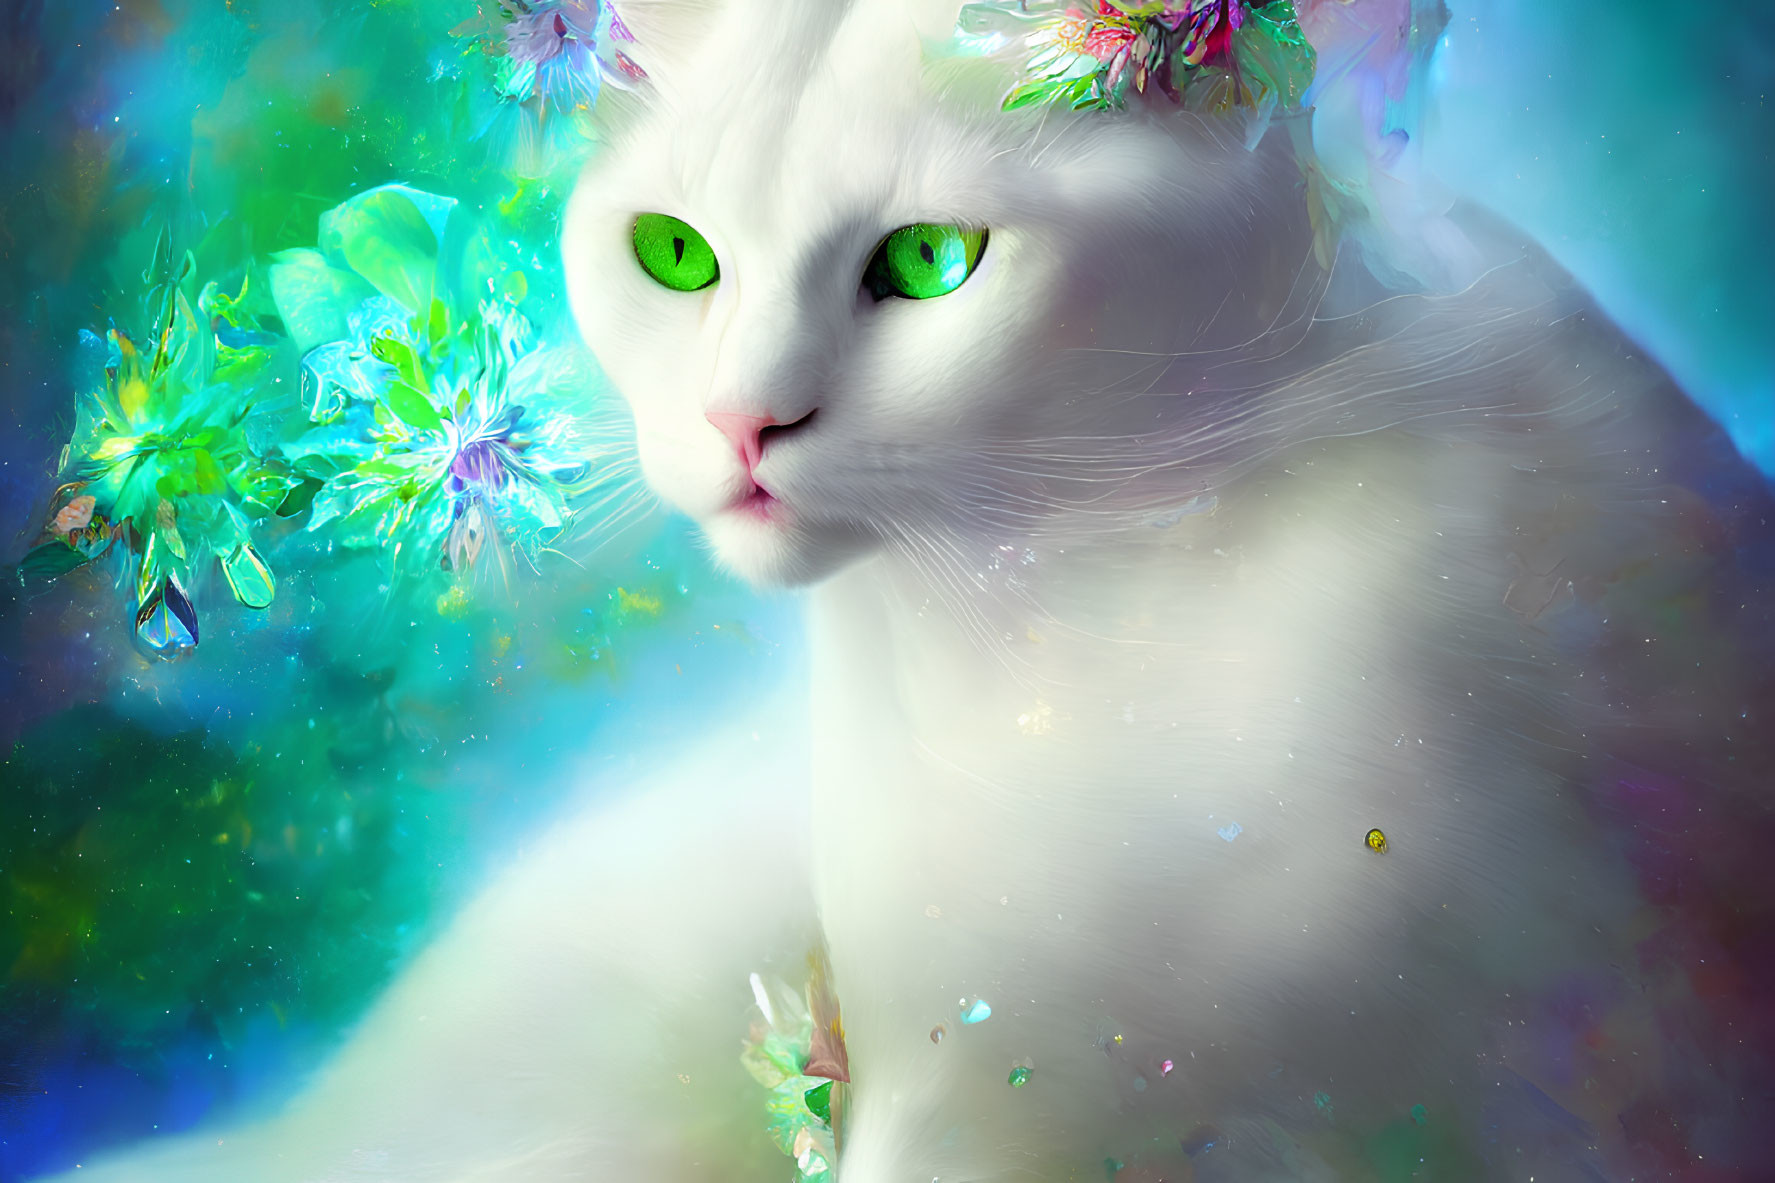 White Cat with Green Eyes in Colorful Cosmic Scene